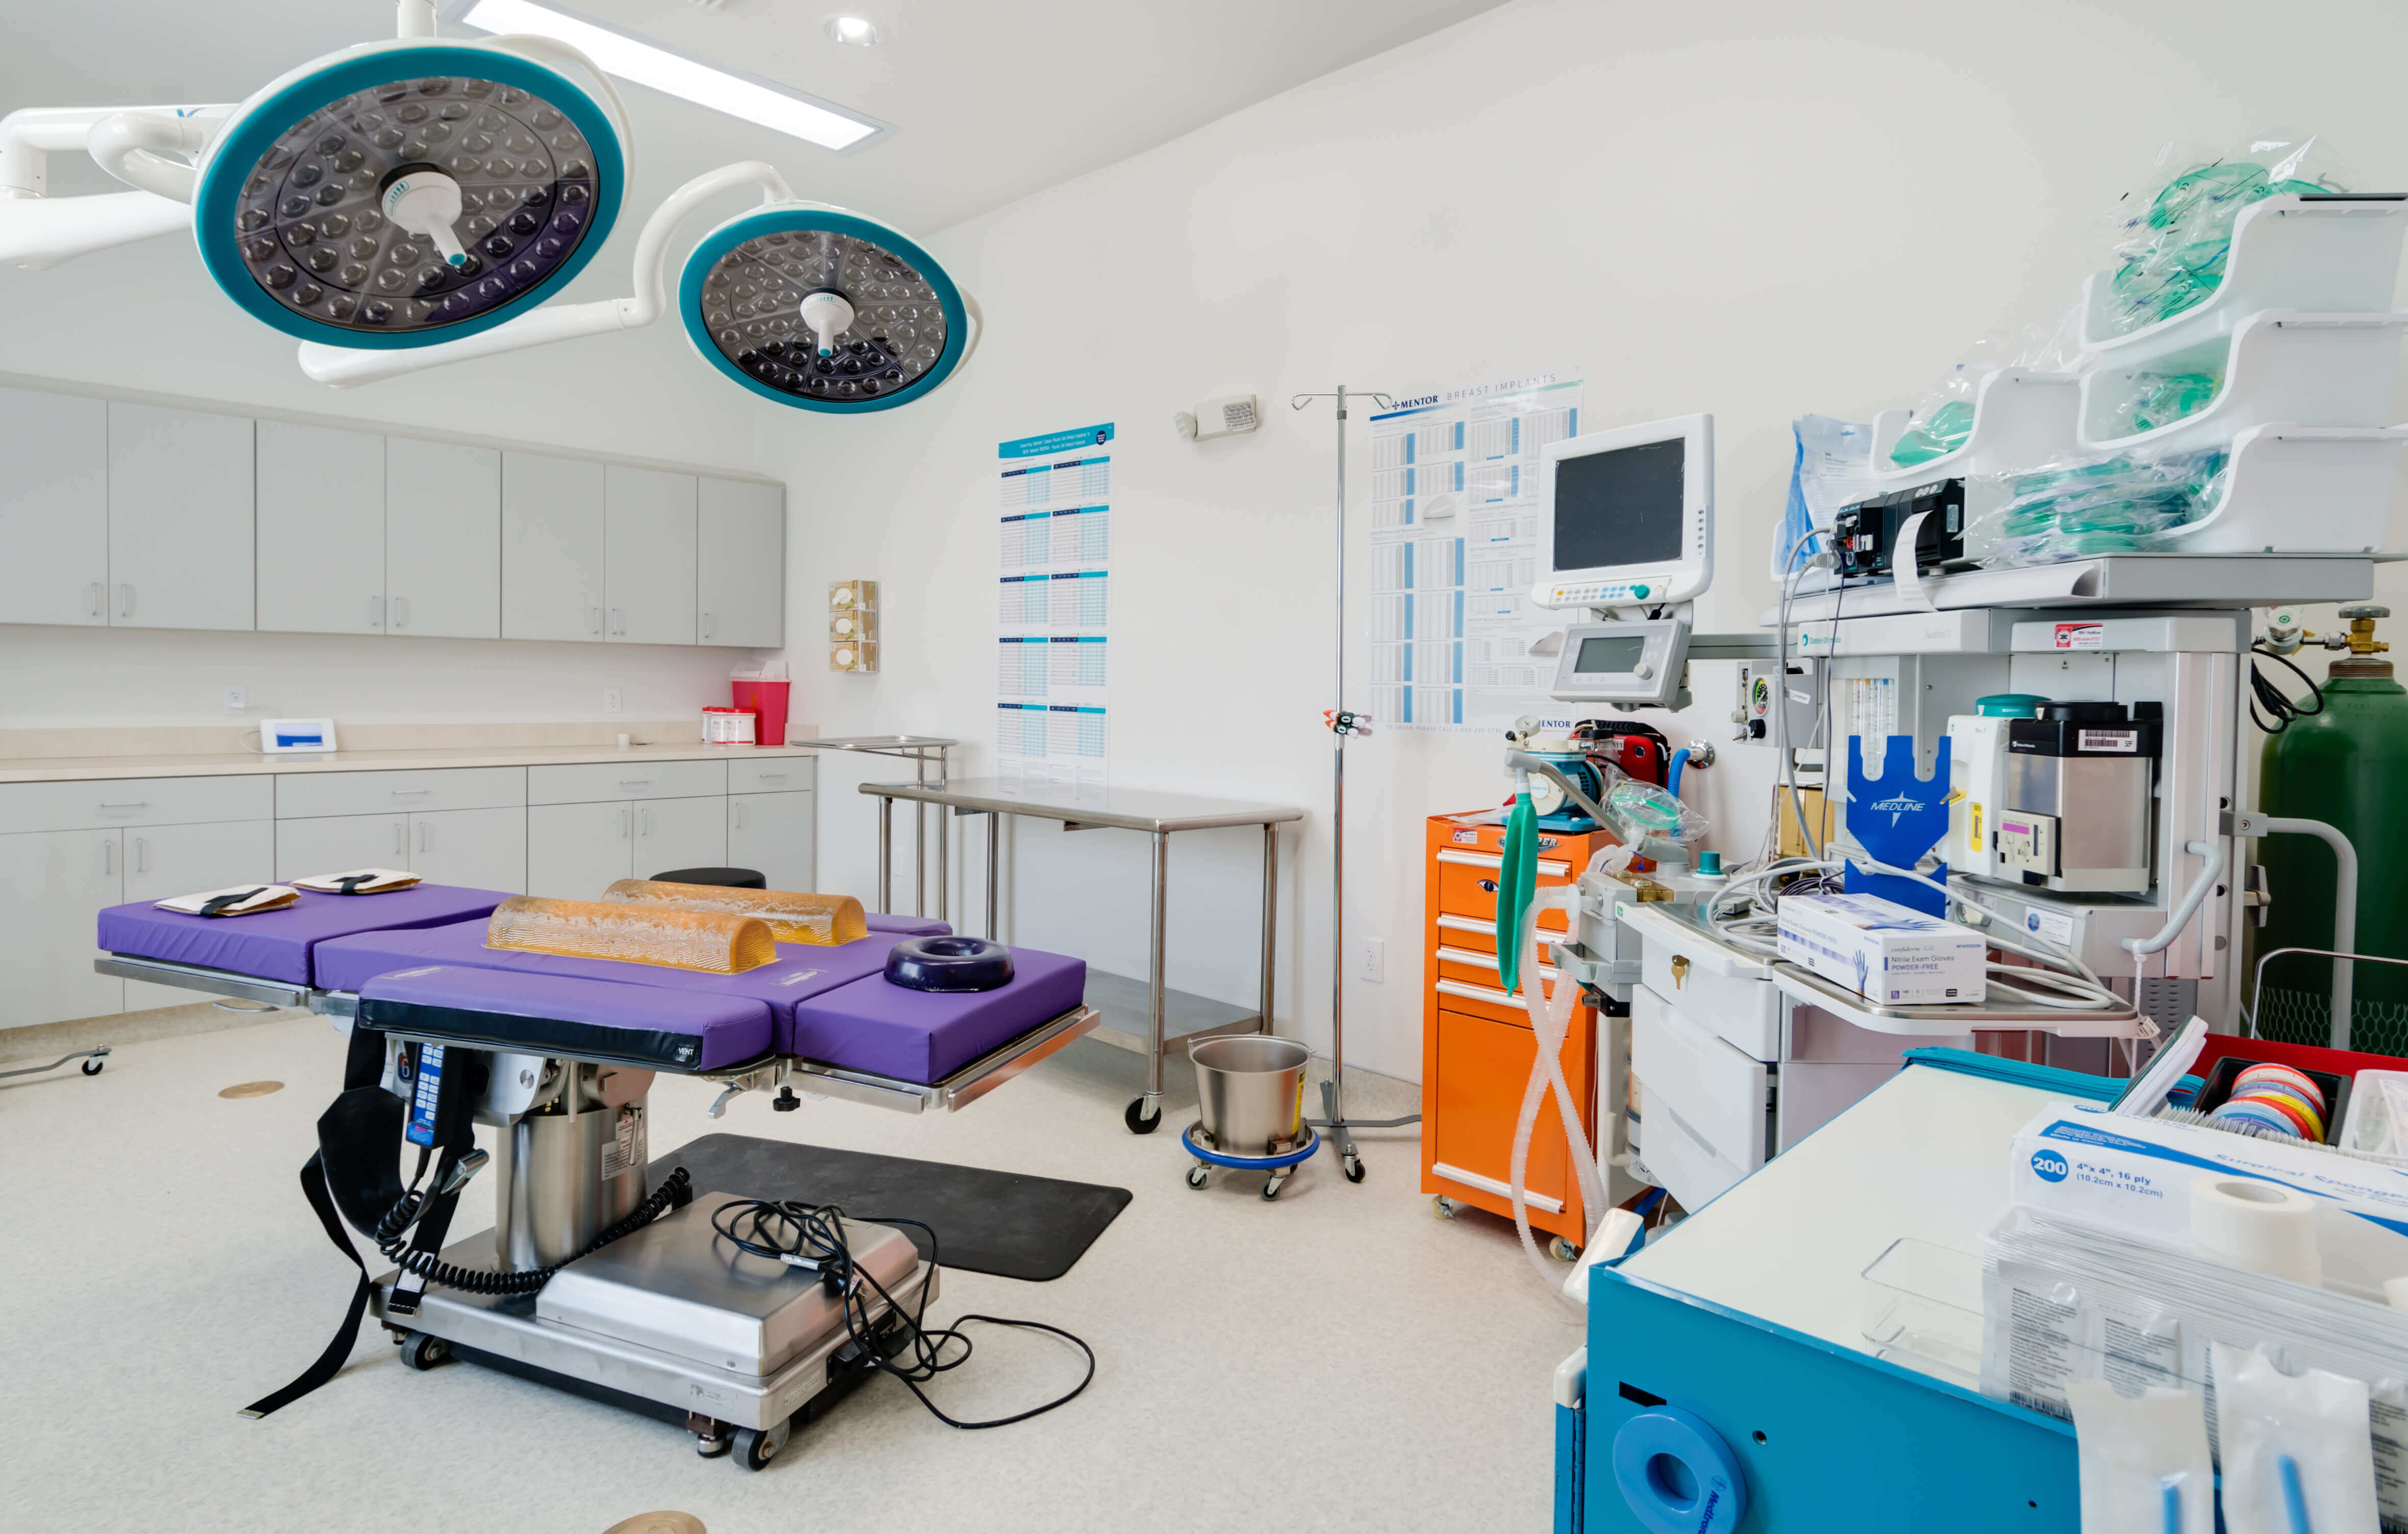 Things to Consider When Building Medical Facilities